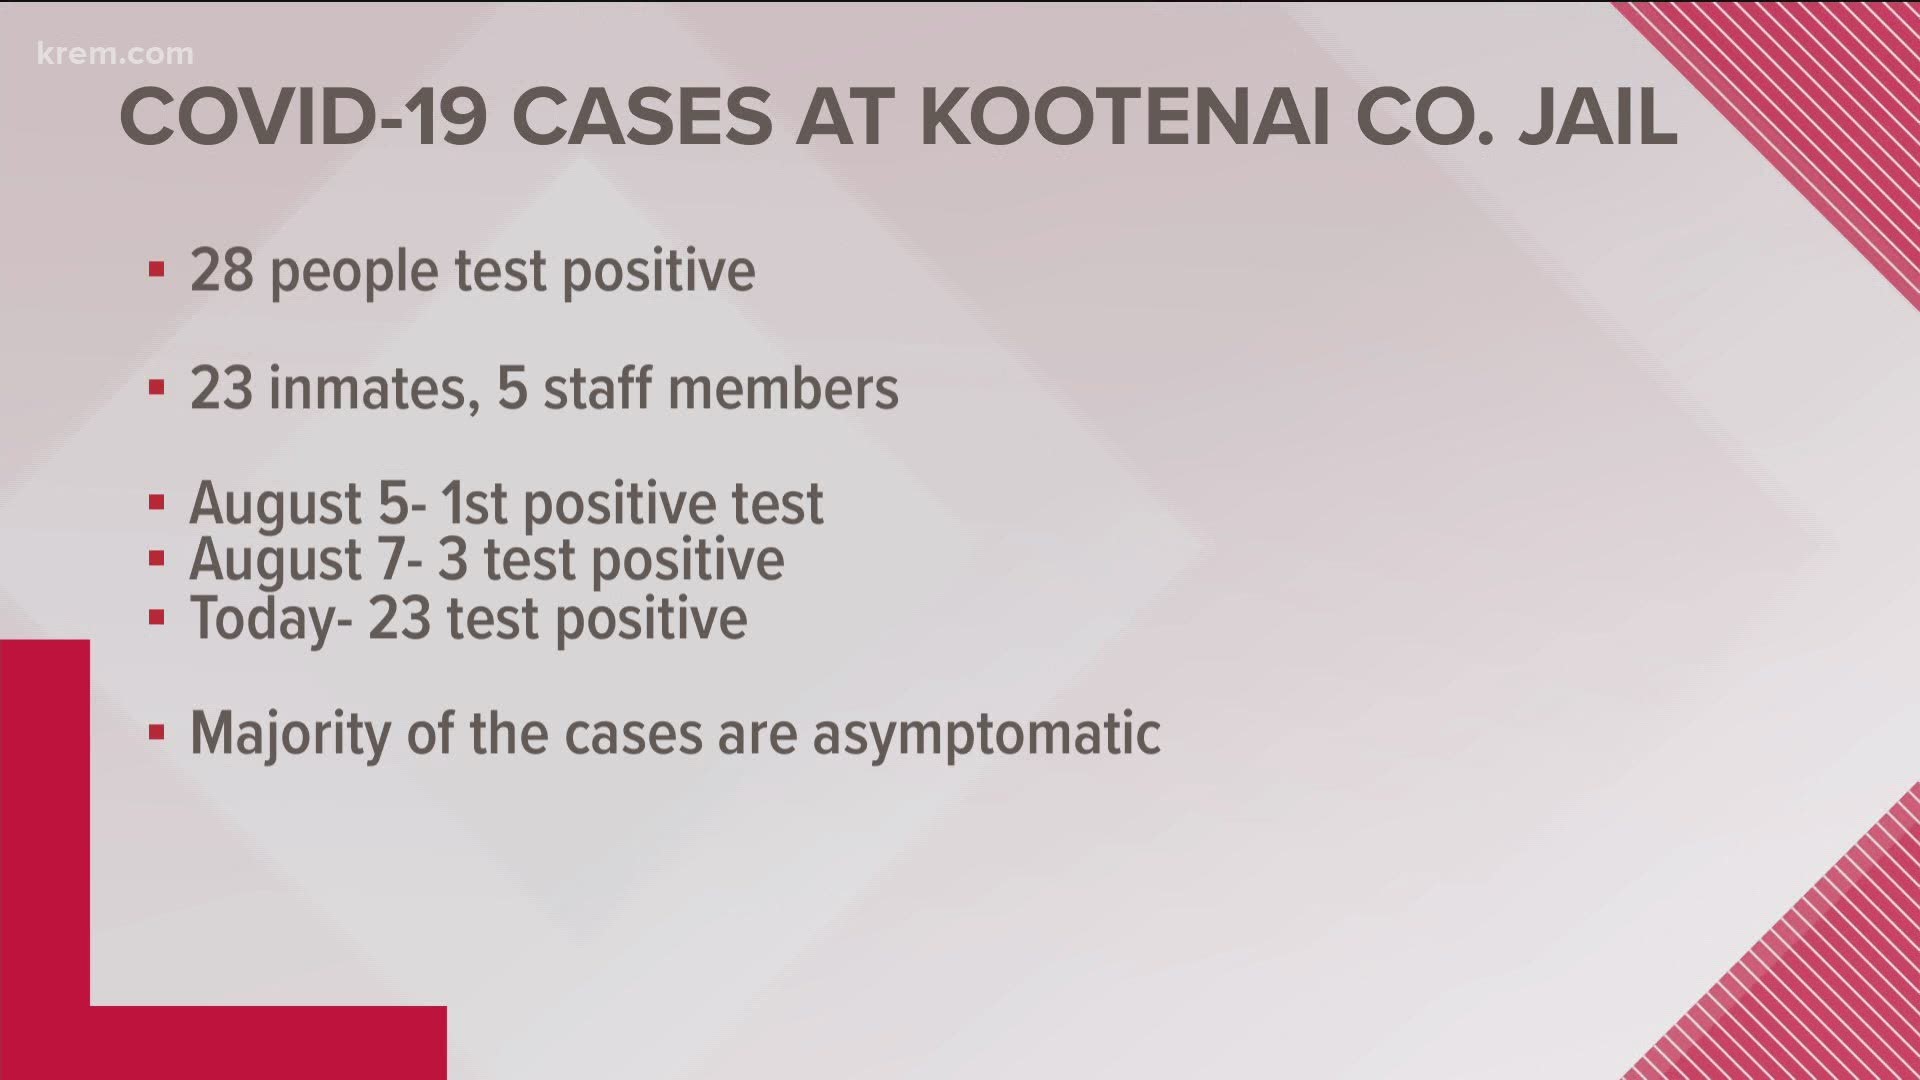 The first positive test result was Aug. 5. An additional three positive results came back Aug. 7 and an additional 23 were reported Monday.